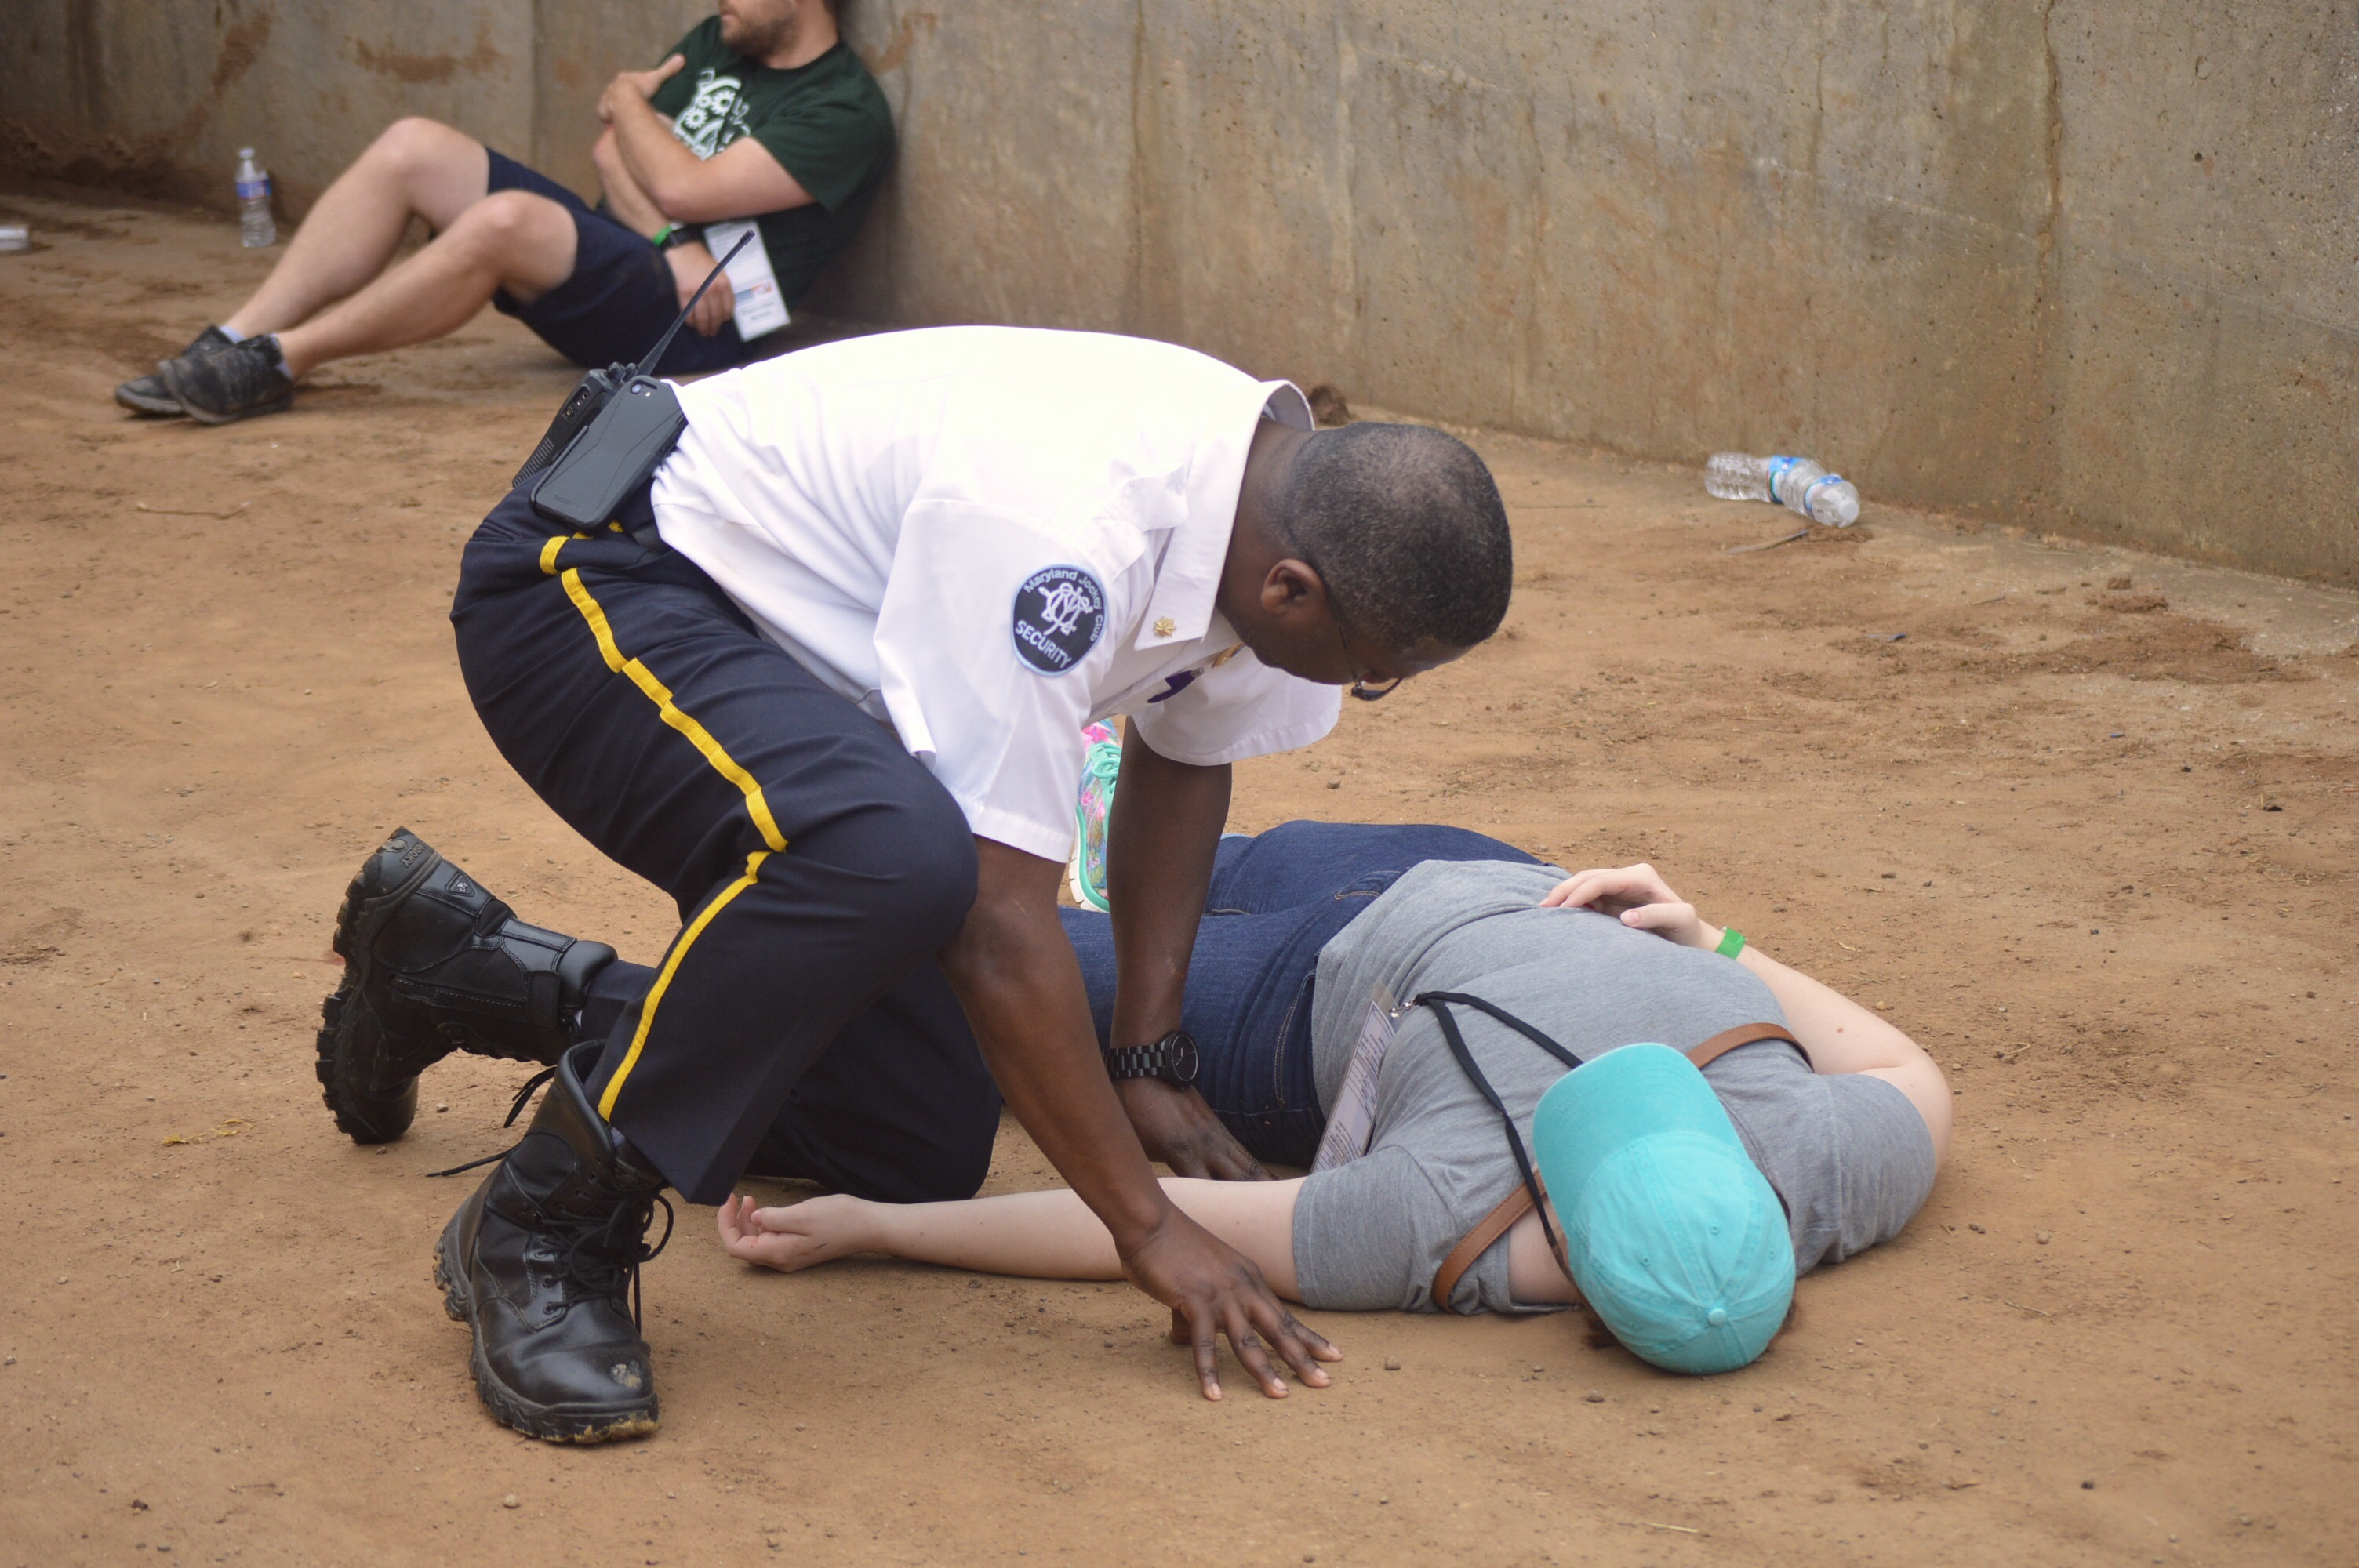 On Sunday June 10, 2018, Sinai Hospital in Baltimore, Maryland, in cooperation with Pimlico Race Course and local police and fire departments, offered first responders the opportunity to enter the scene of a mock mass-casualty event. (Credit Anthony C. Hayes/Baltimore Post-Examiner)